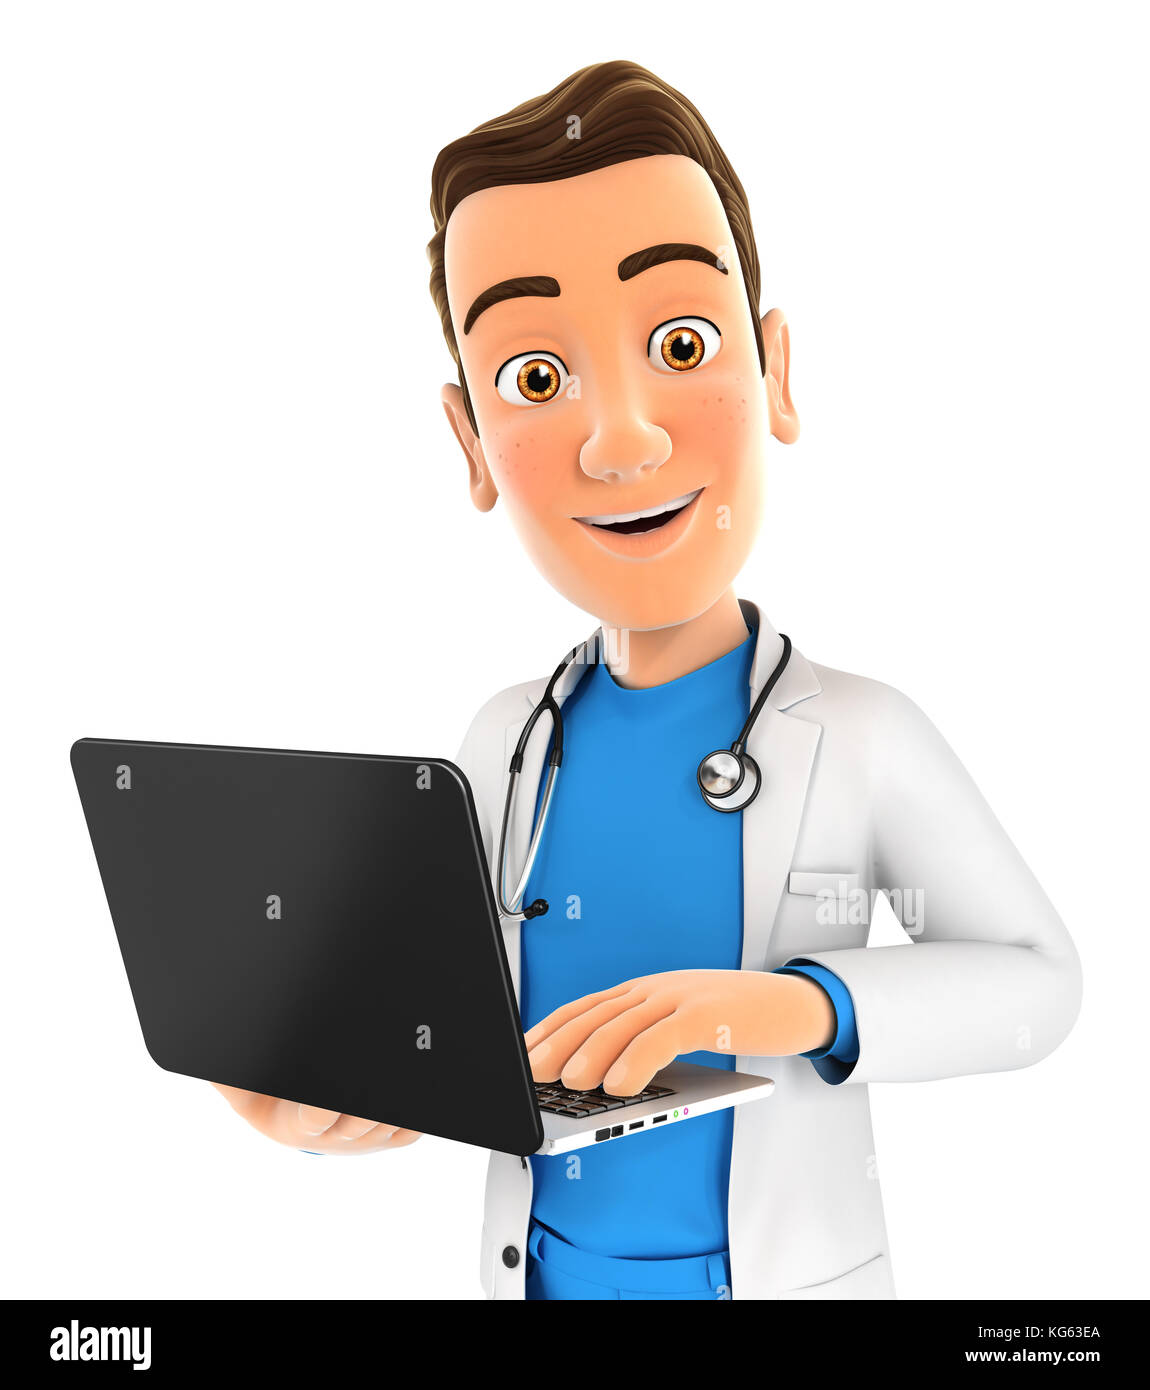 3d doctor standing and holding laptop, illustration with isolated white background Stock Photo